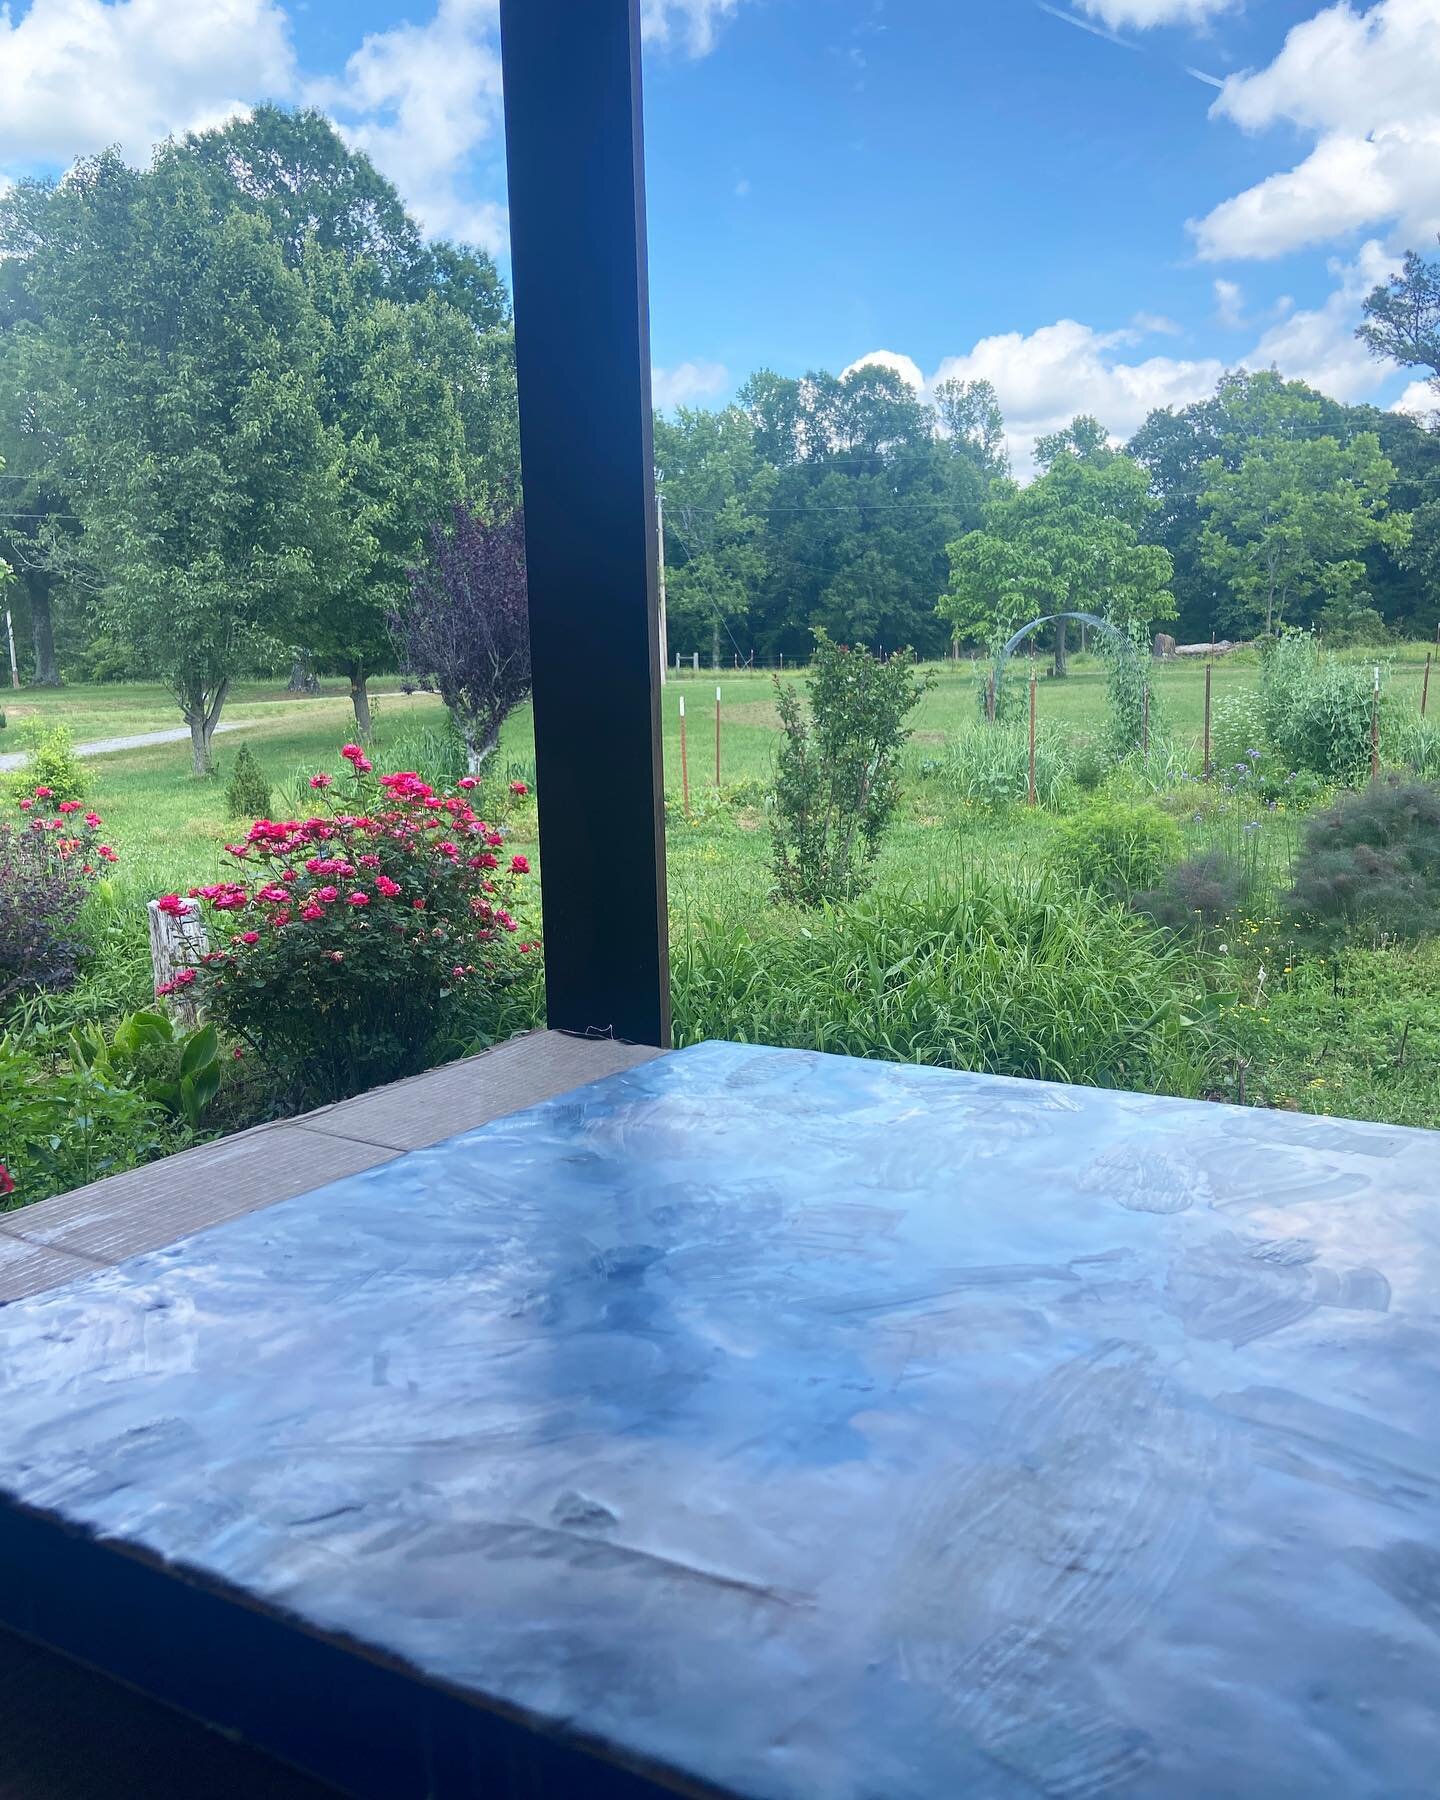 I always look forward to my studio days on the porch. Two artworks- the one I&rsquo;m making with paper, paint, and wax and the one I planted growing in the garden.